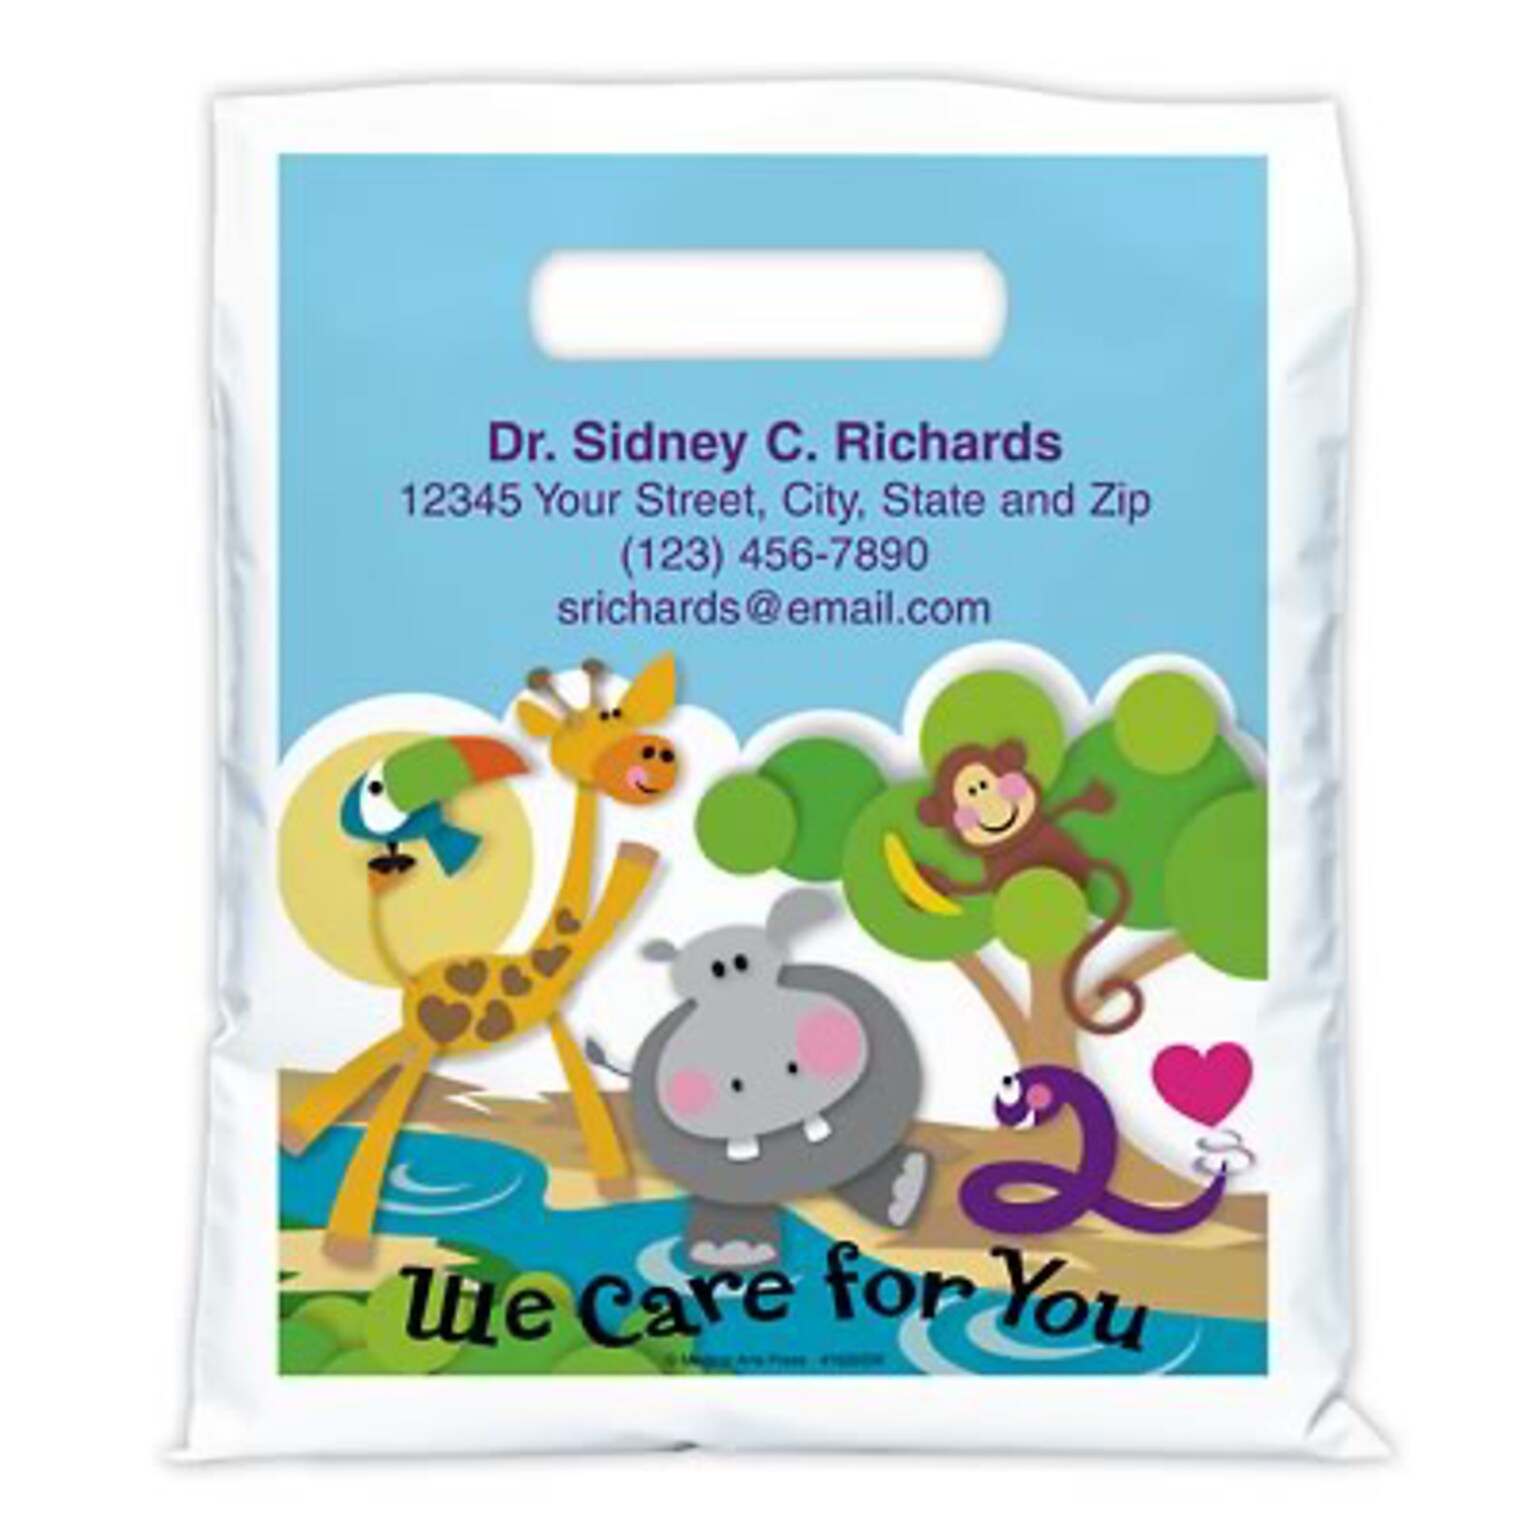 Medical Arts Press® Medical Personalized Full-Color Bags;7-1/2x9, Hippo Giraffe Monkey, 100 Bags, (41629)